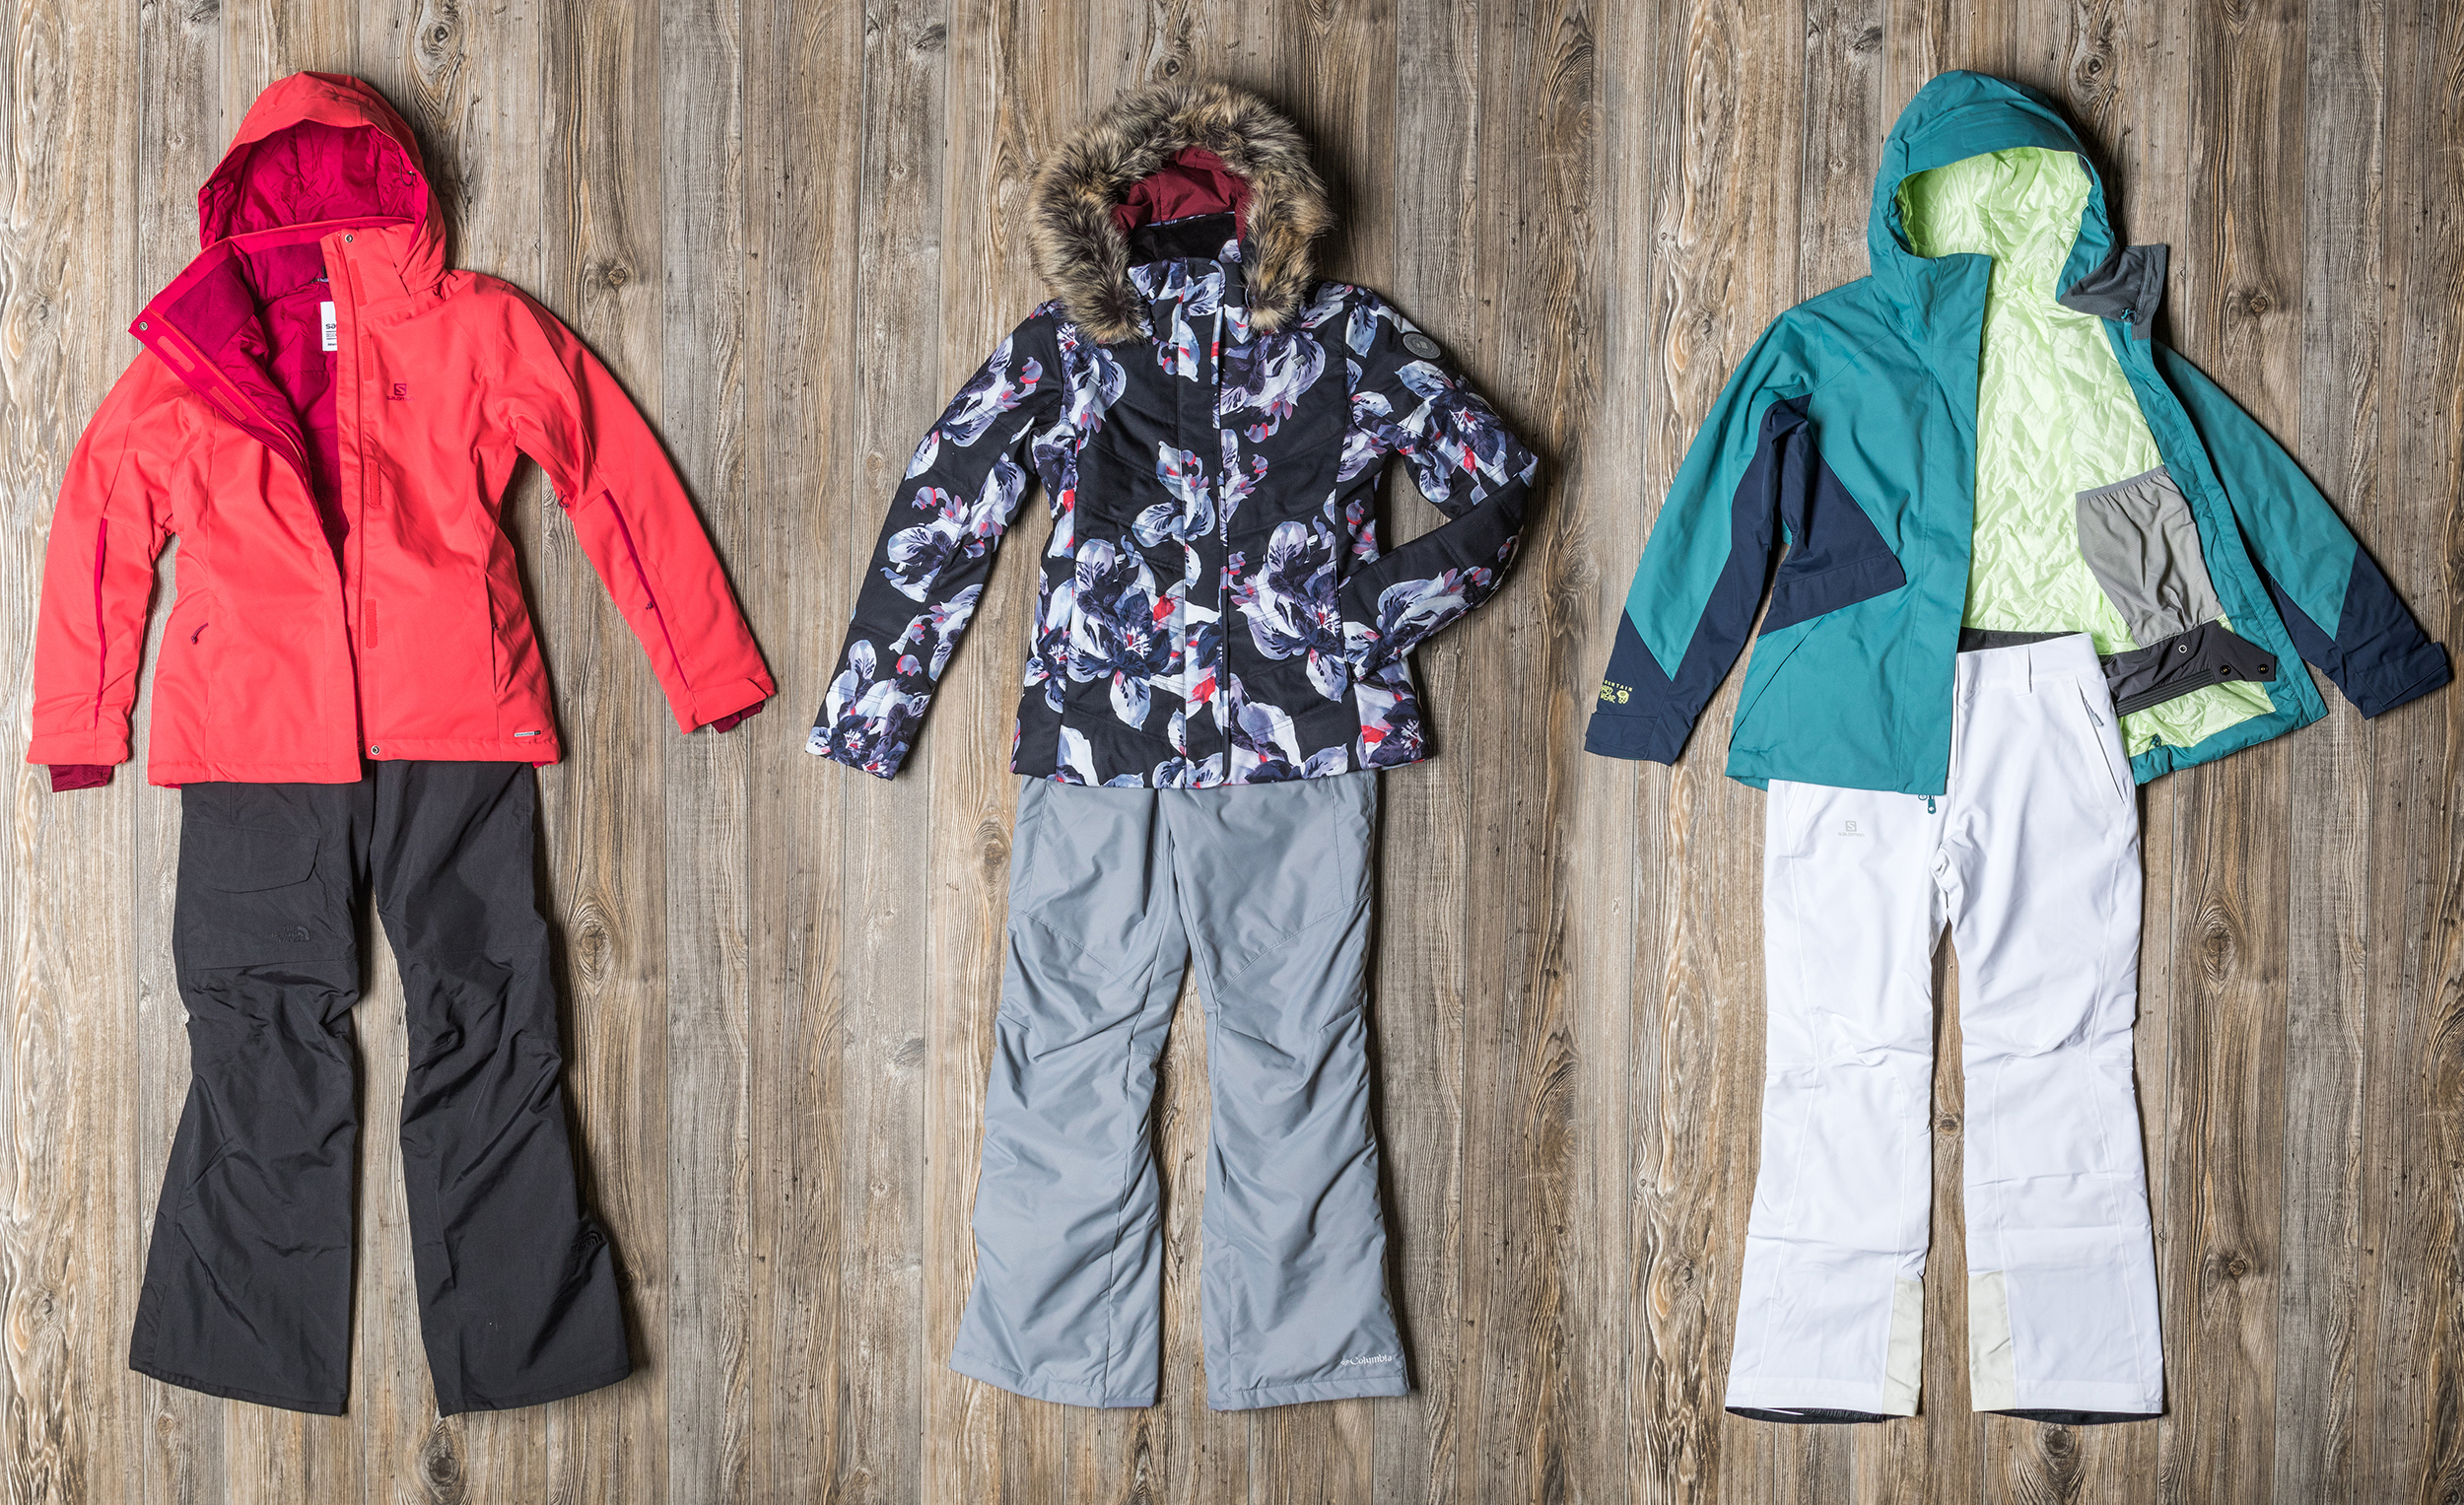 2019 Women's Ski Outerwear Combos - The-House